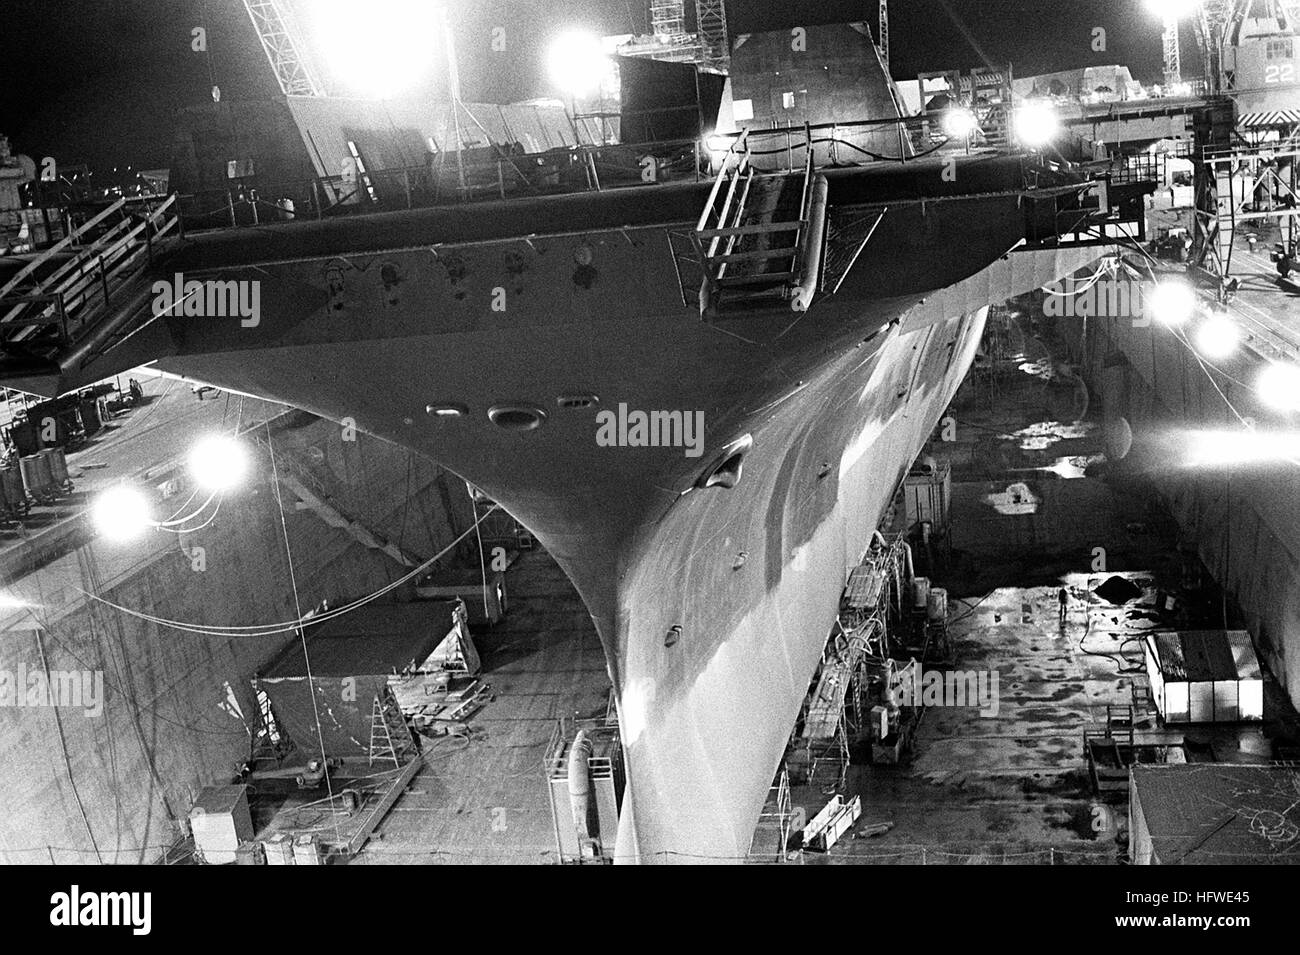 Port bow nighttime view of the aircraft carrier USS KITTY HAWK (CV-63) in dry dock. USS Kitty Hawk (CV-63) docked Stock Photo